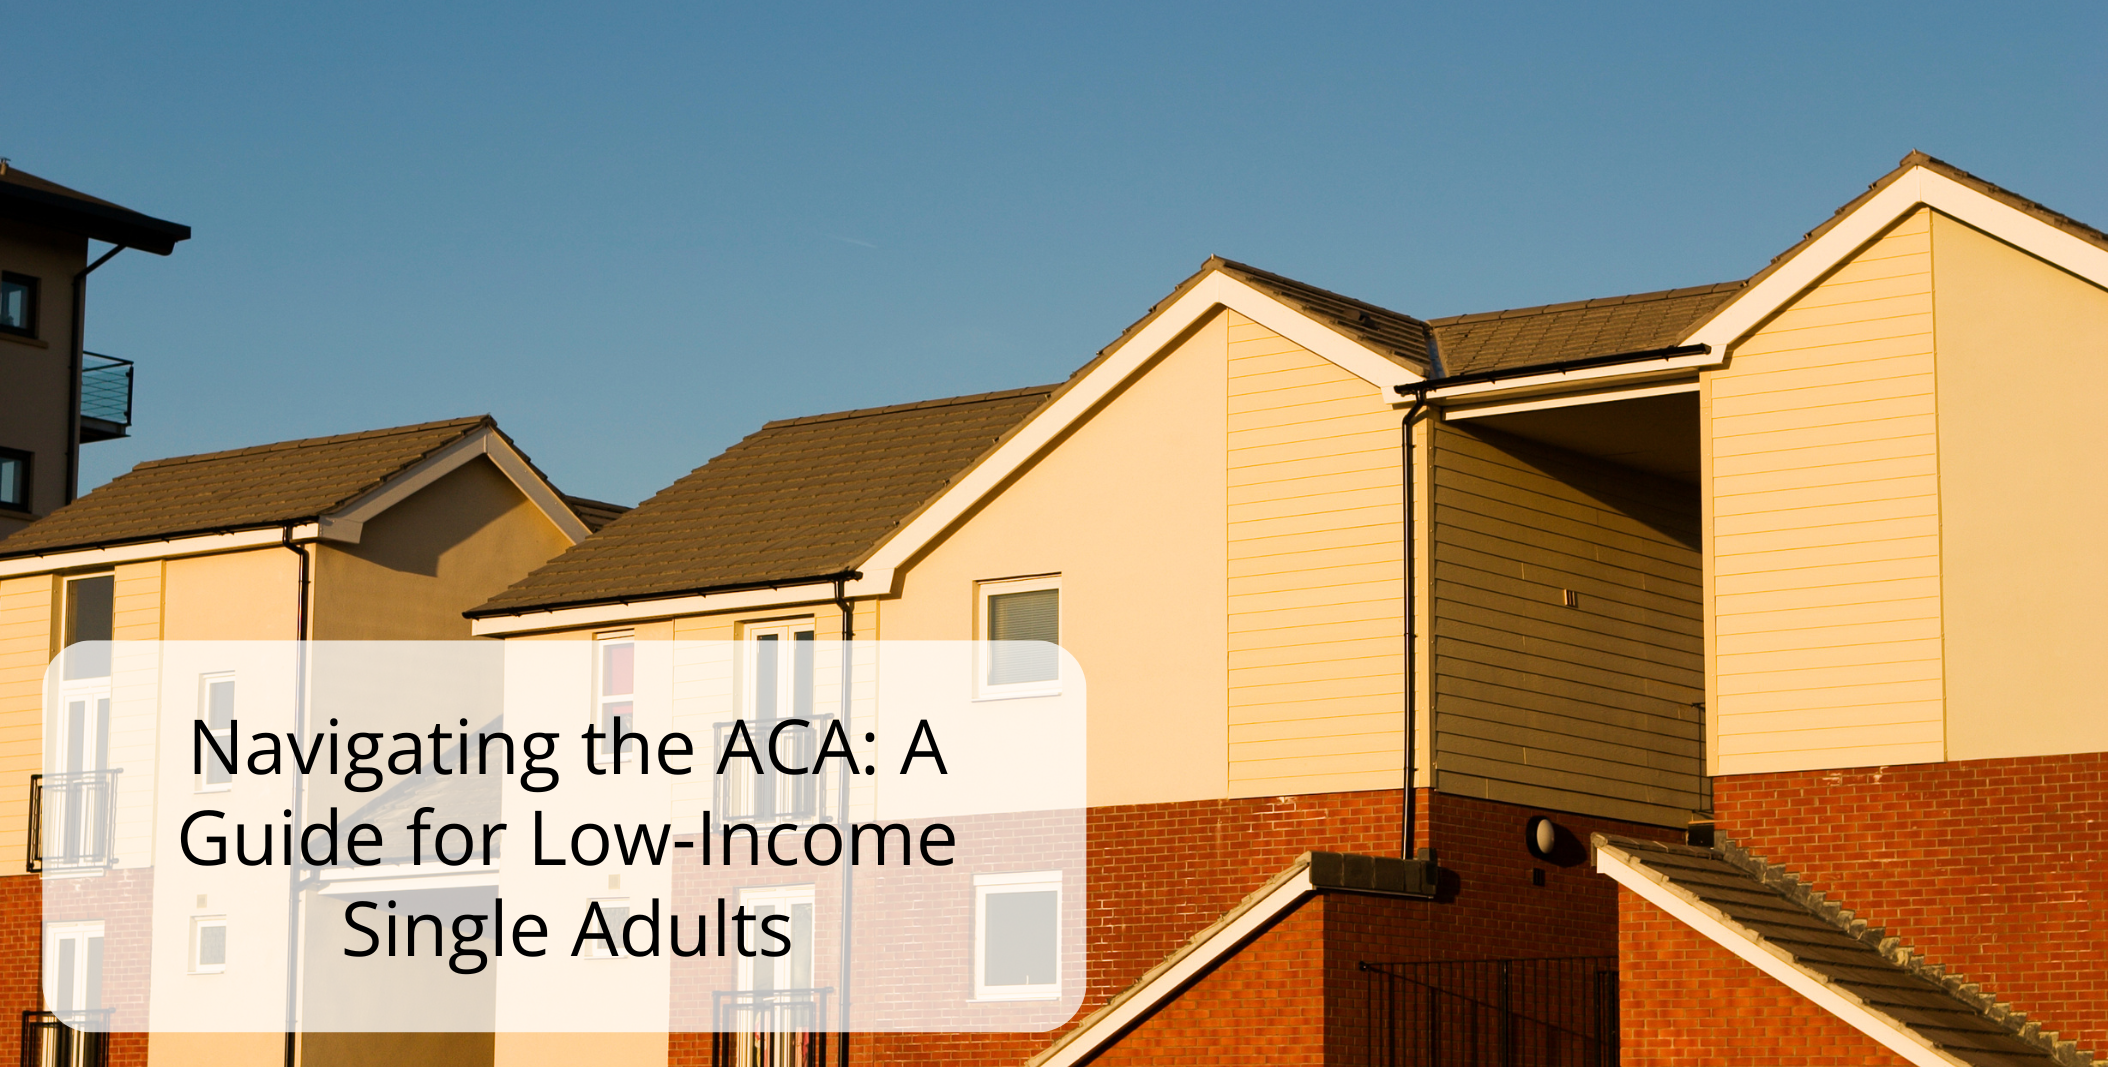 Navigating the ACA: A Guide for Low-Income Single Adults